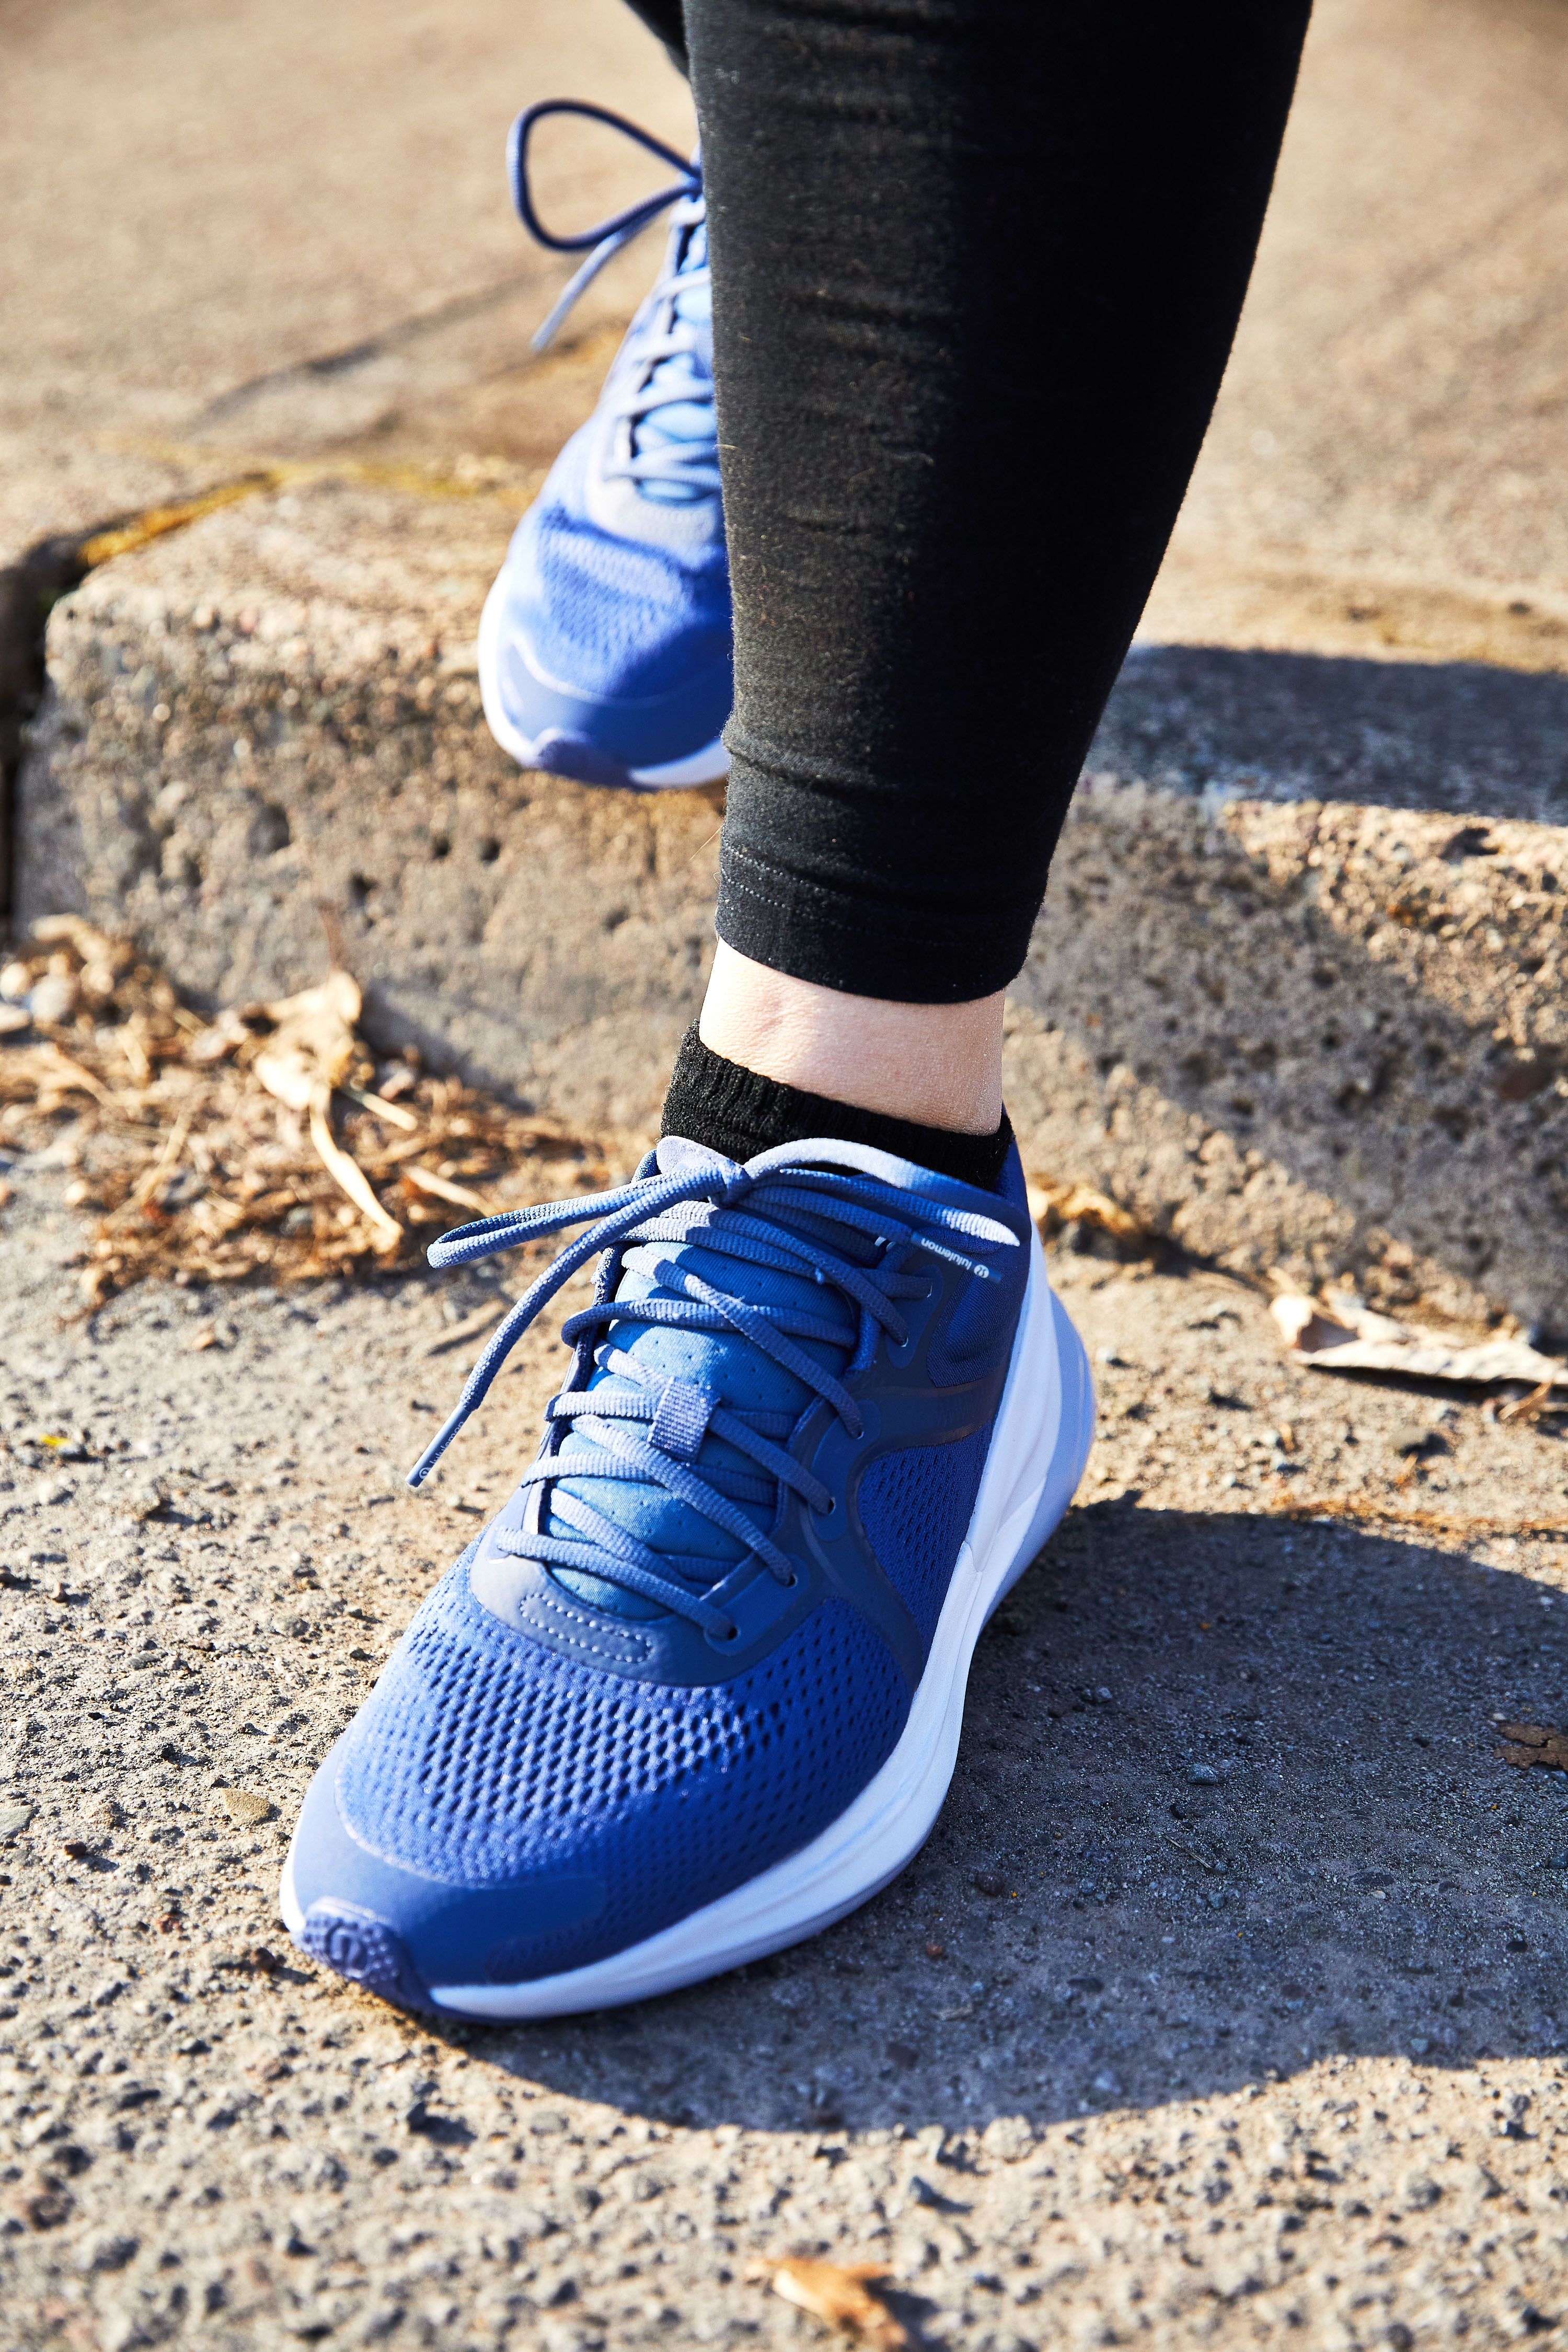 Lululemon Blissfeel Review: The Athleisure Brand's First Running Shoe Is  Here, And I Didn't Hate It